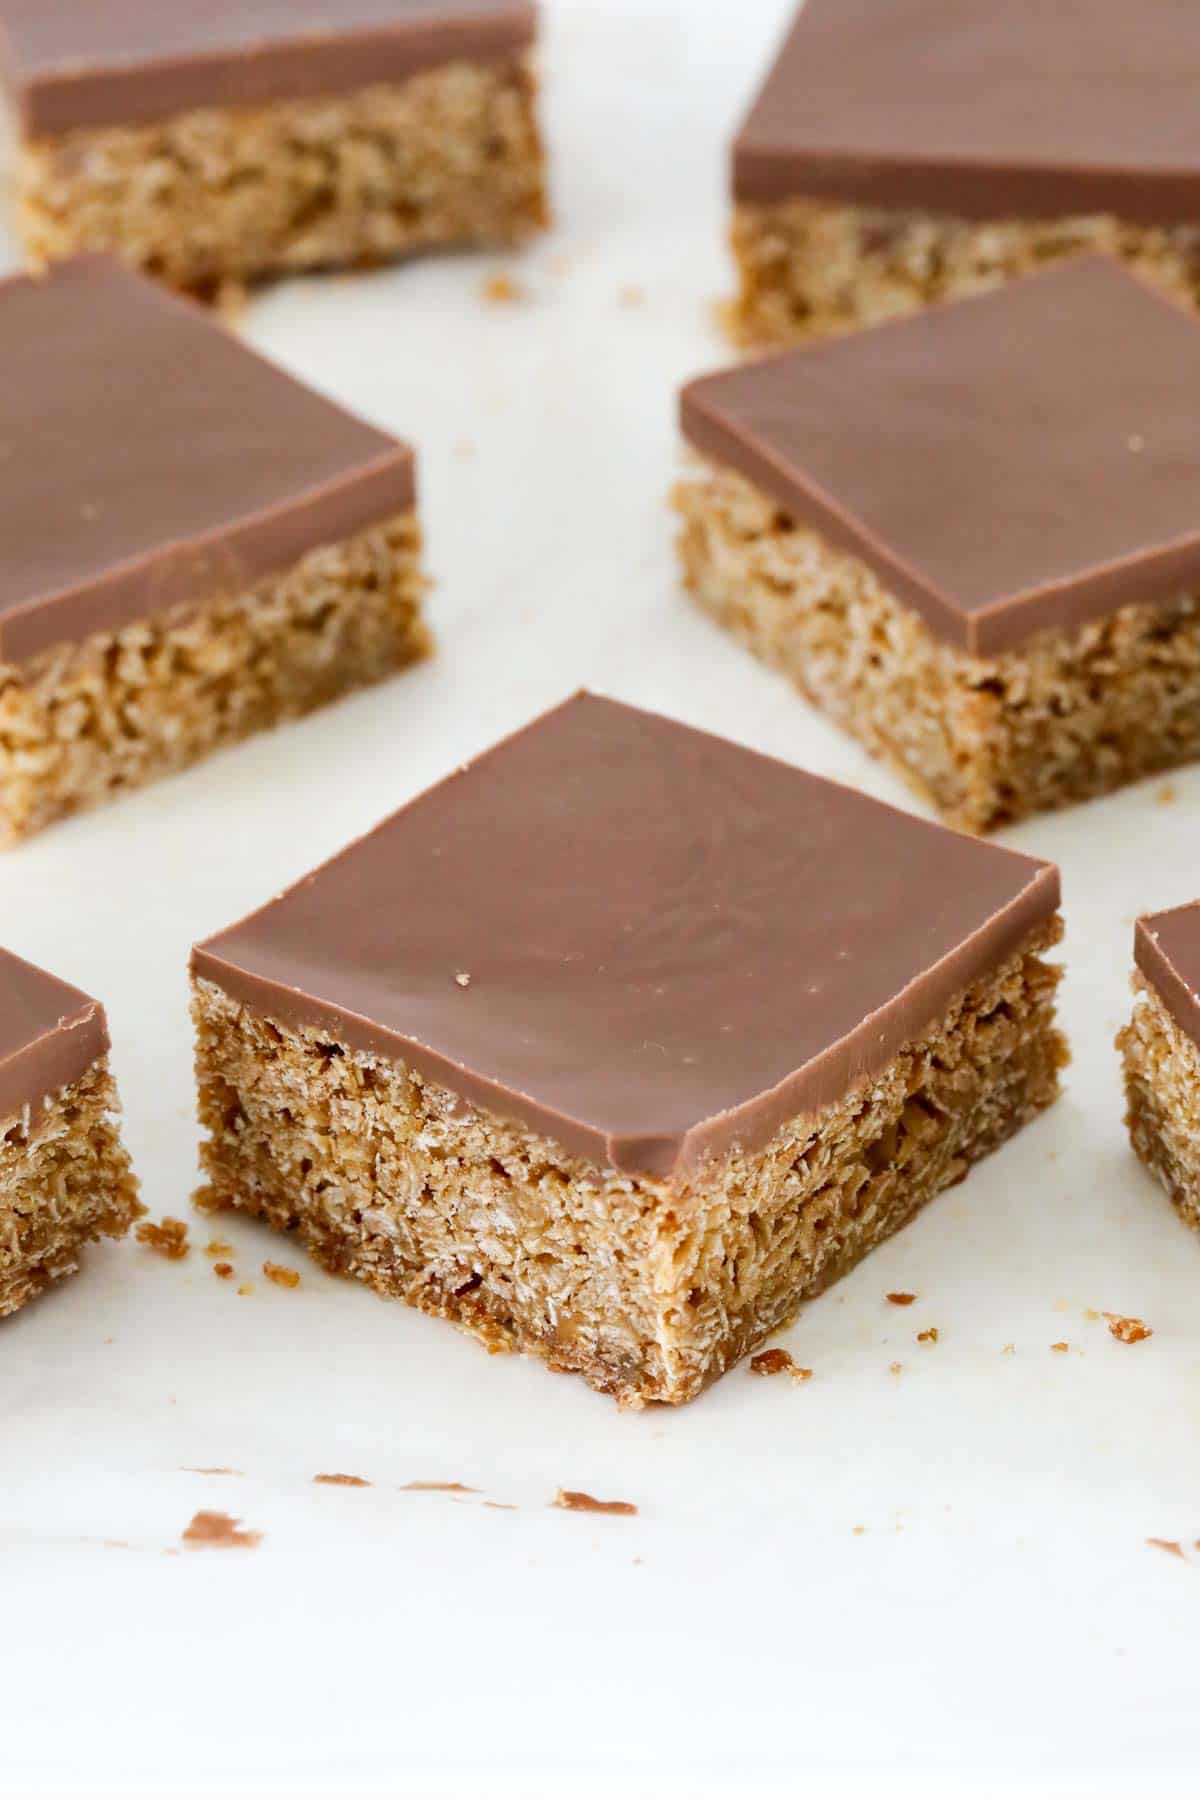 Chocolate flapjacks with chocolate on top, cut into squares.